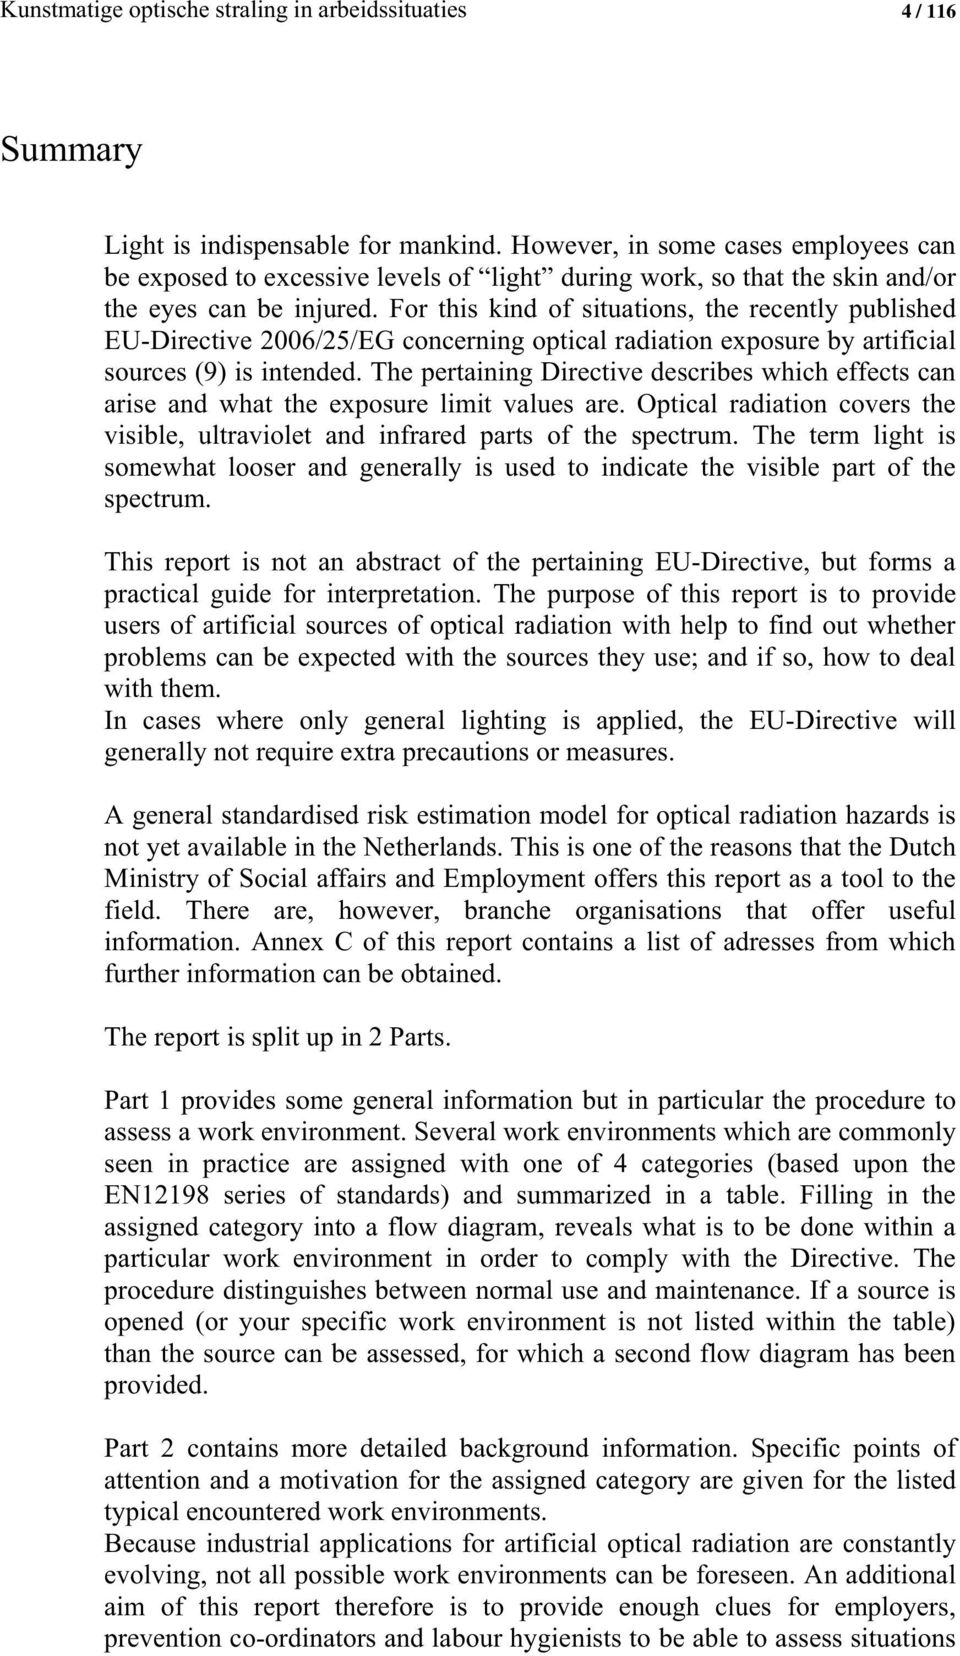 For this kind of situations, the recently published EU-Directive 2006/25/EG concerning optical radiation exposure by artificial sources (9) is intended.